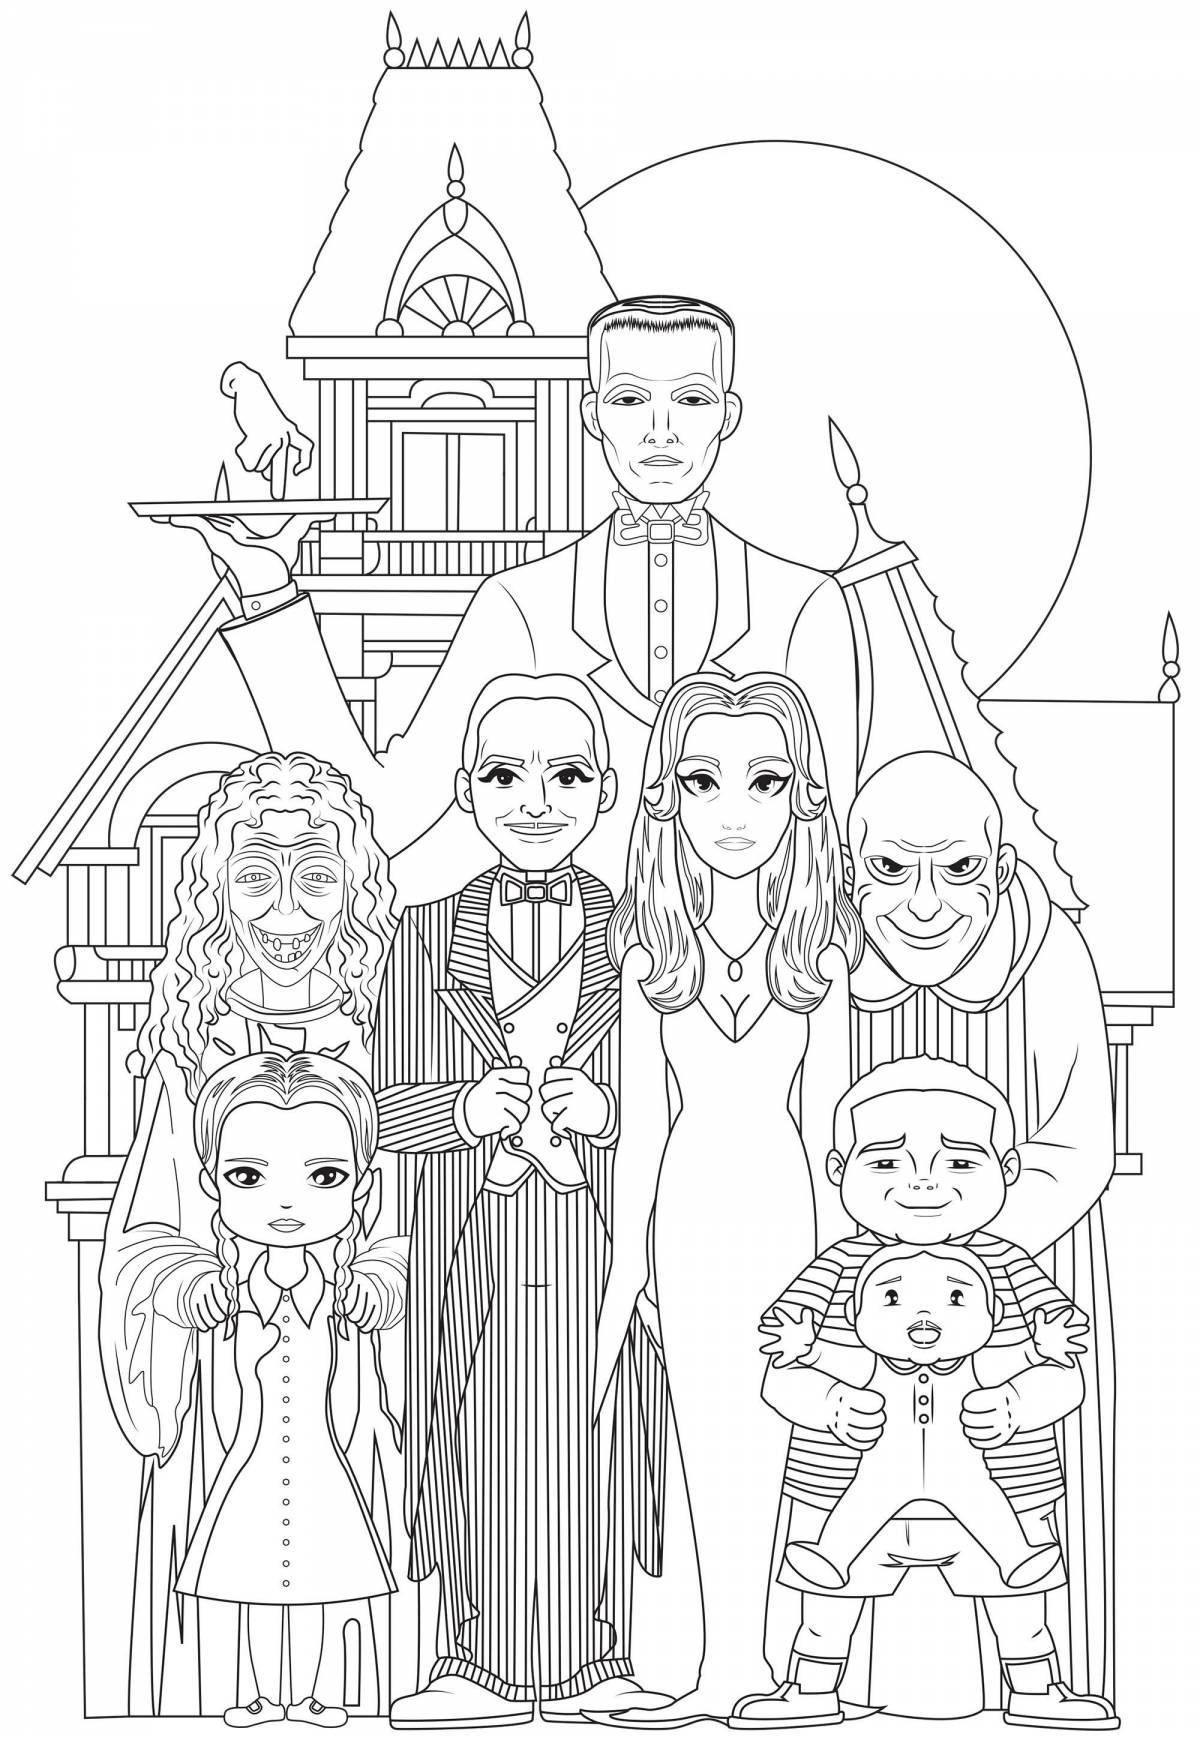 Addams fairy tale environment coloring page